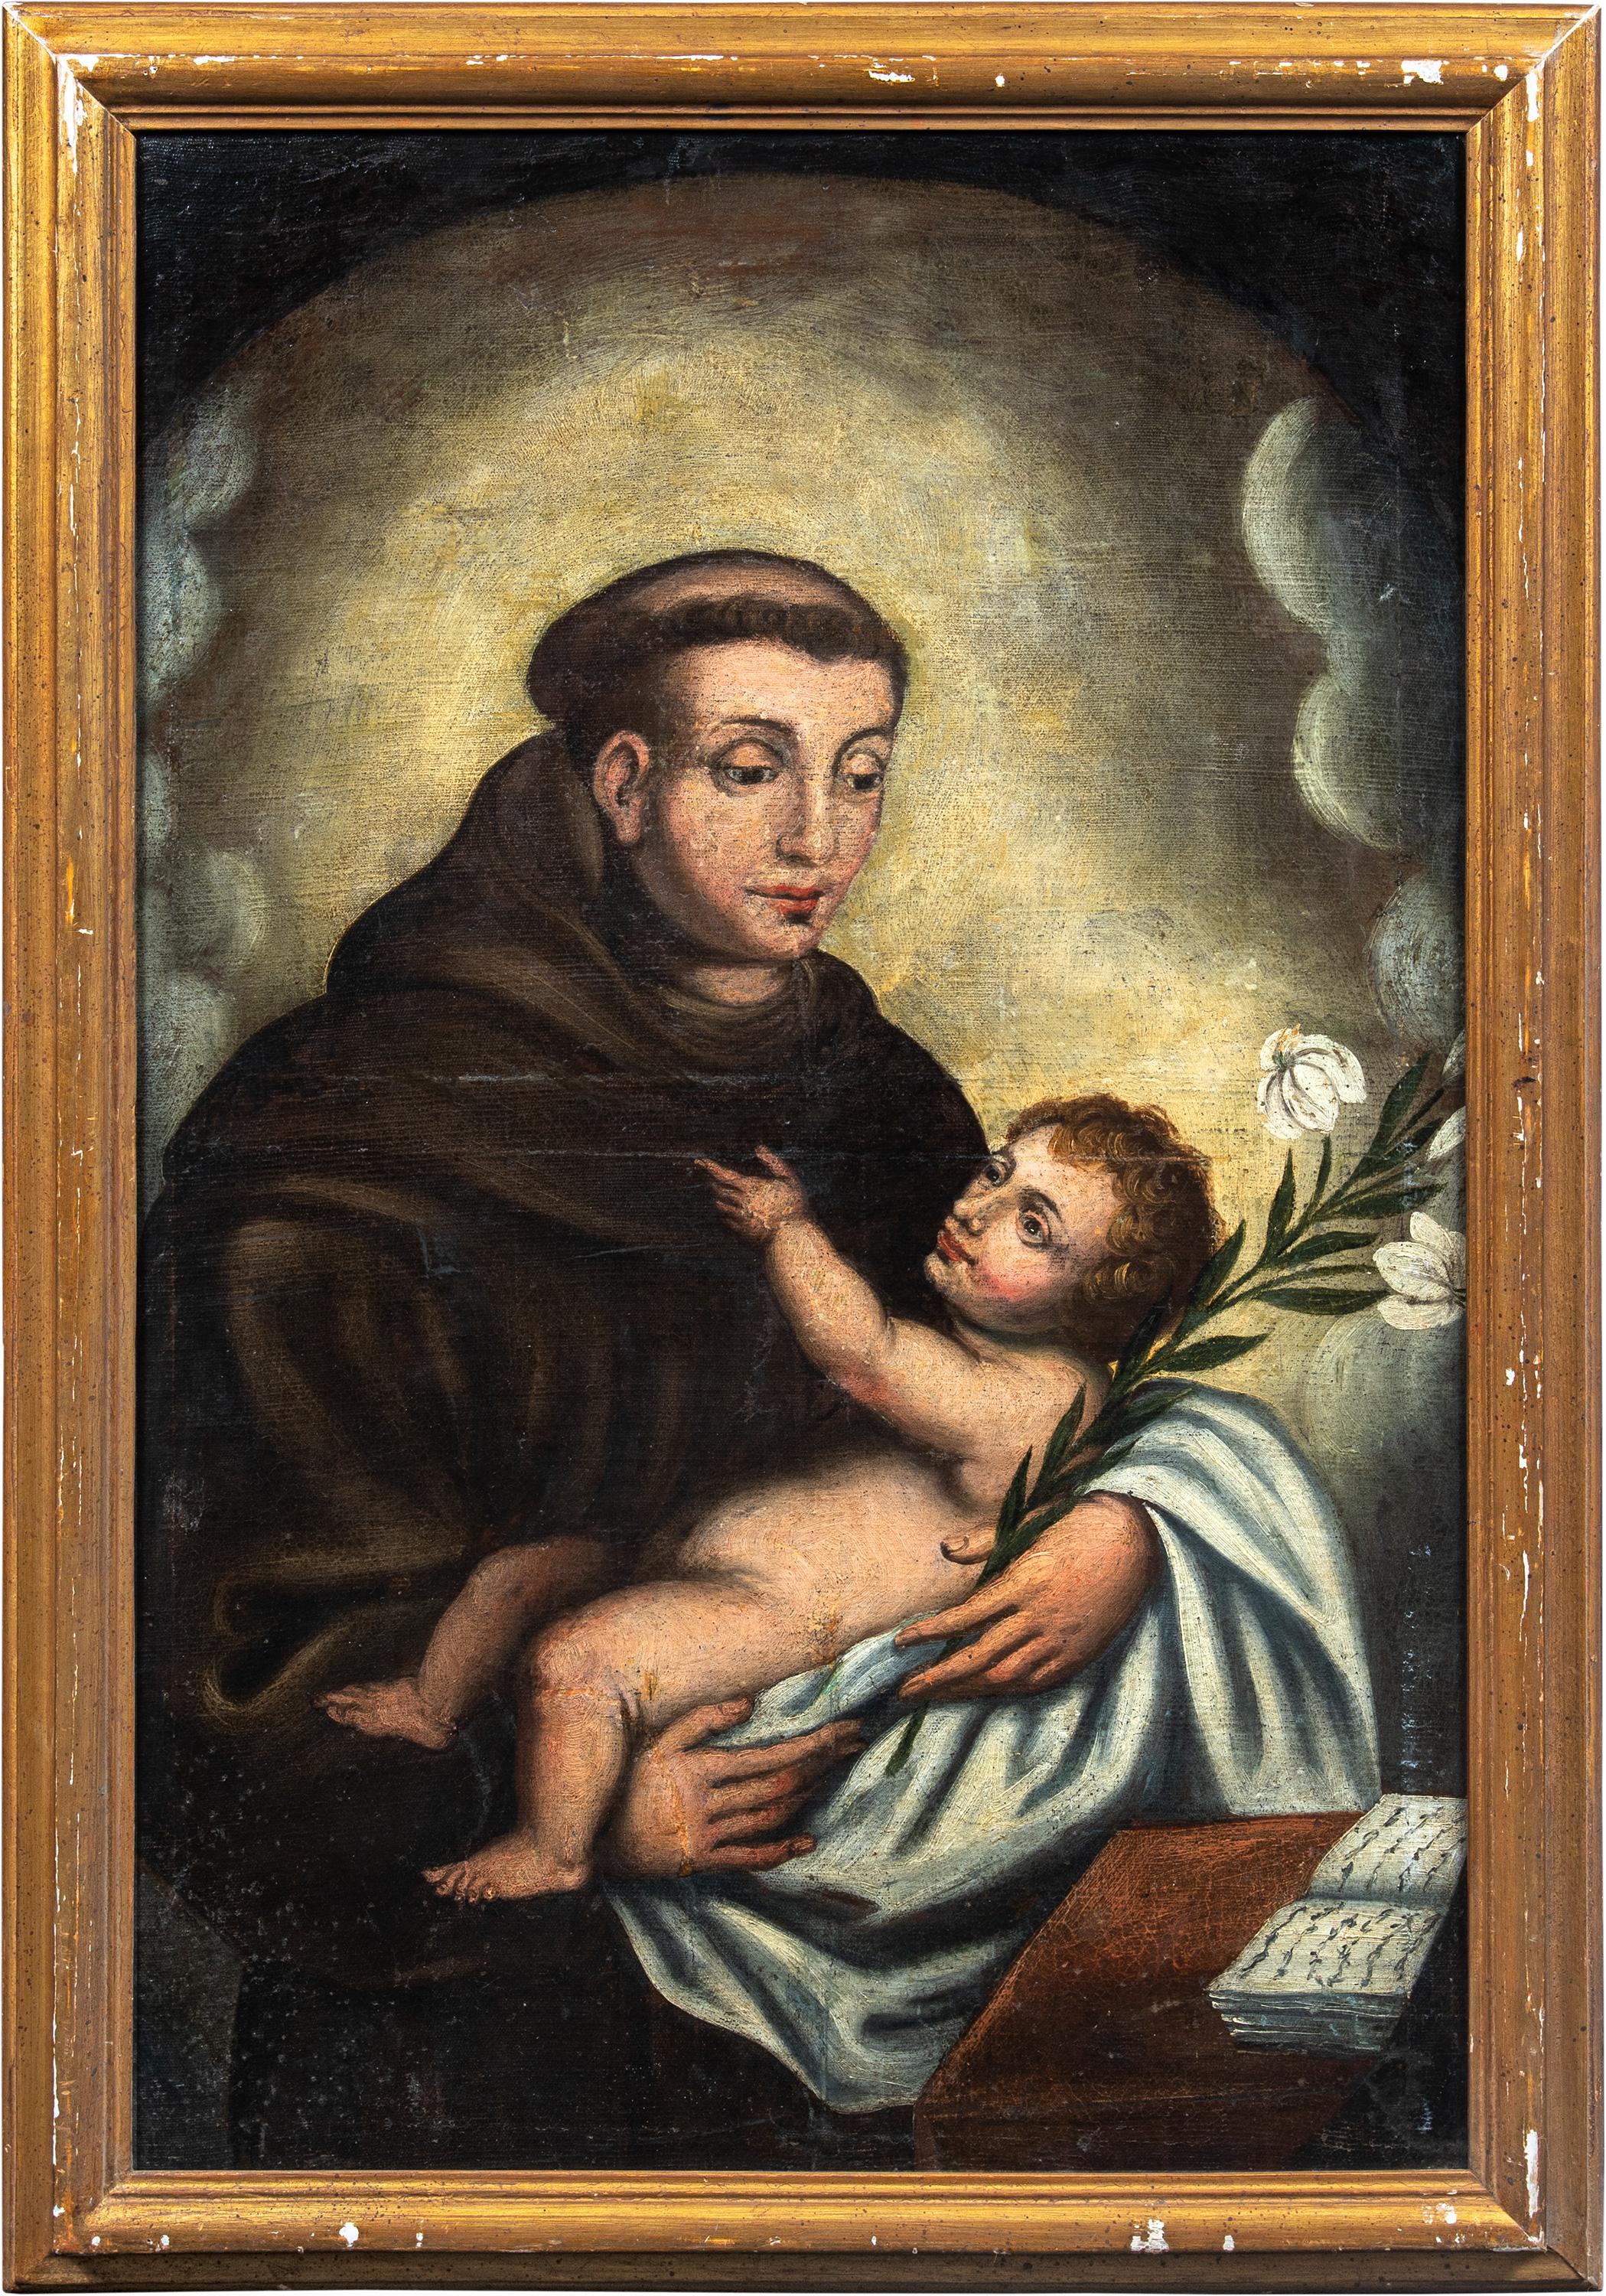 Unknown Landscape Painting - 18th century Italian figure painting - Saint Anthony of Padua with Child